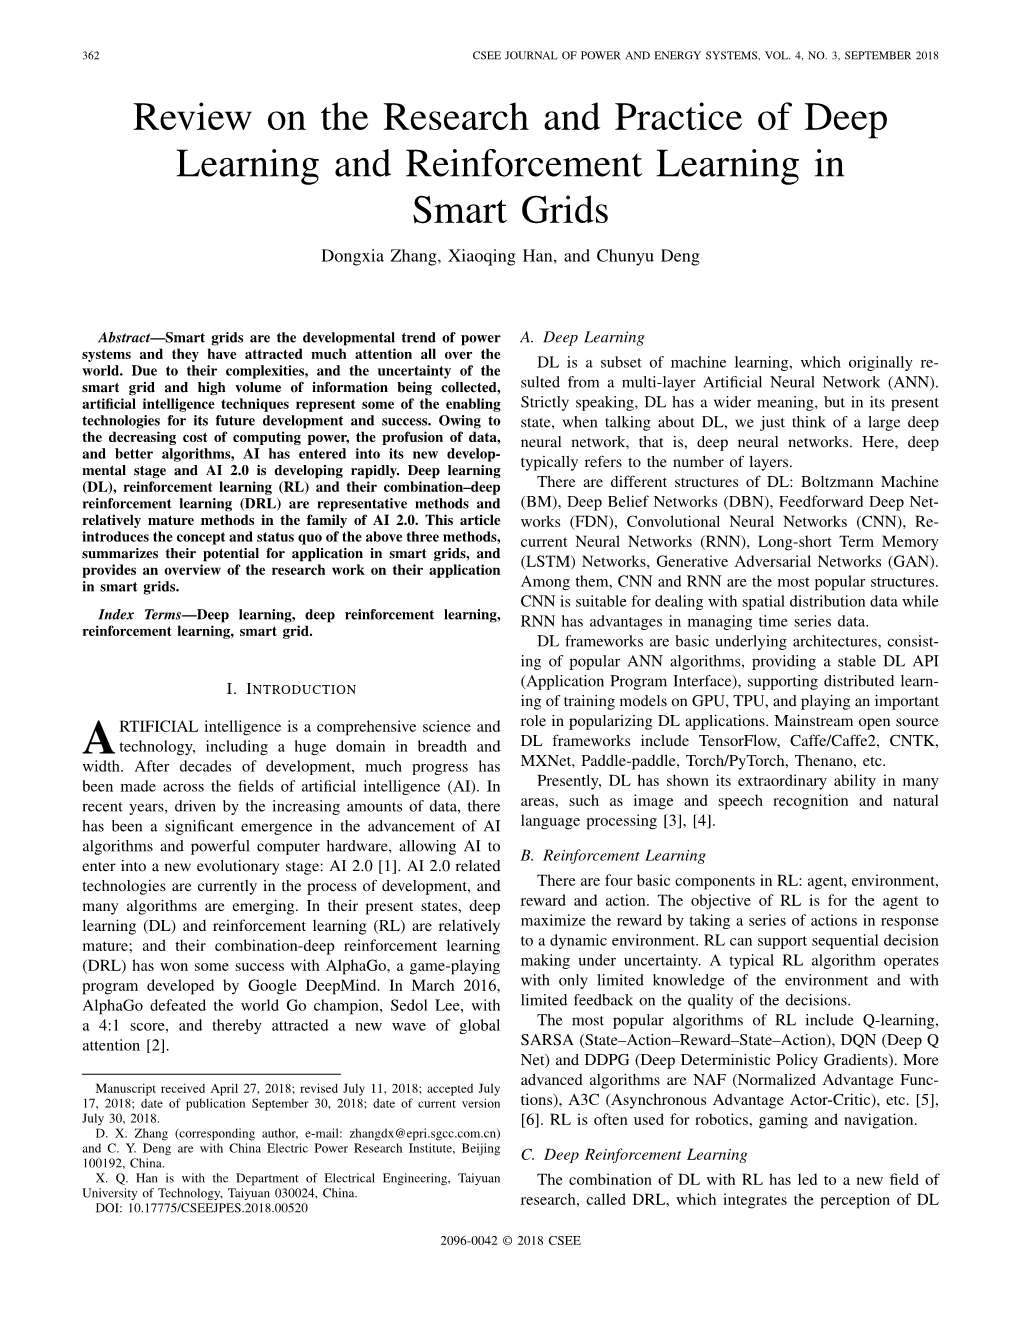 Review on the Research and Practice of Deep Learning and Reinforcement Learning in Smart Grids Dongxia Zhang, Xiaoqing Han, and Chunyu Deng